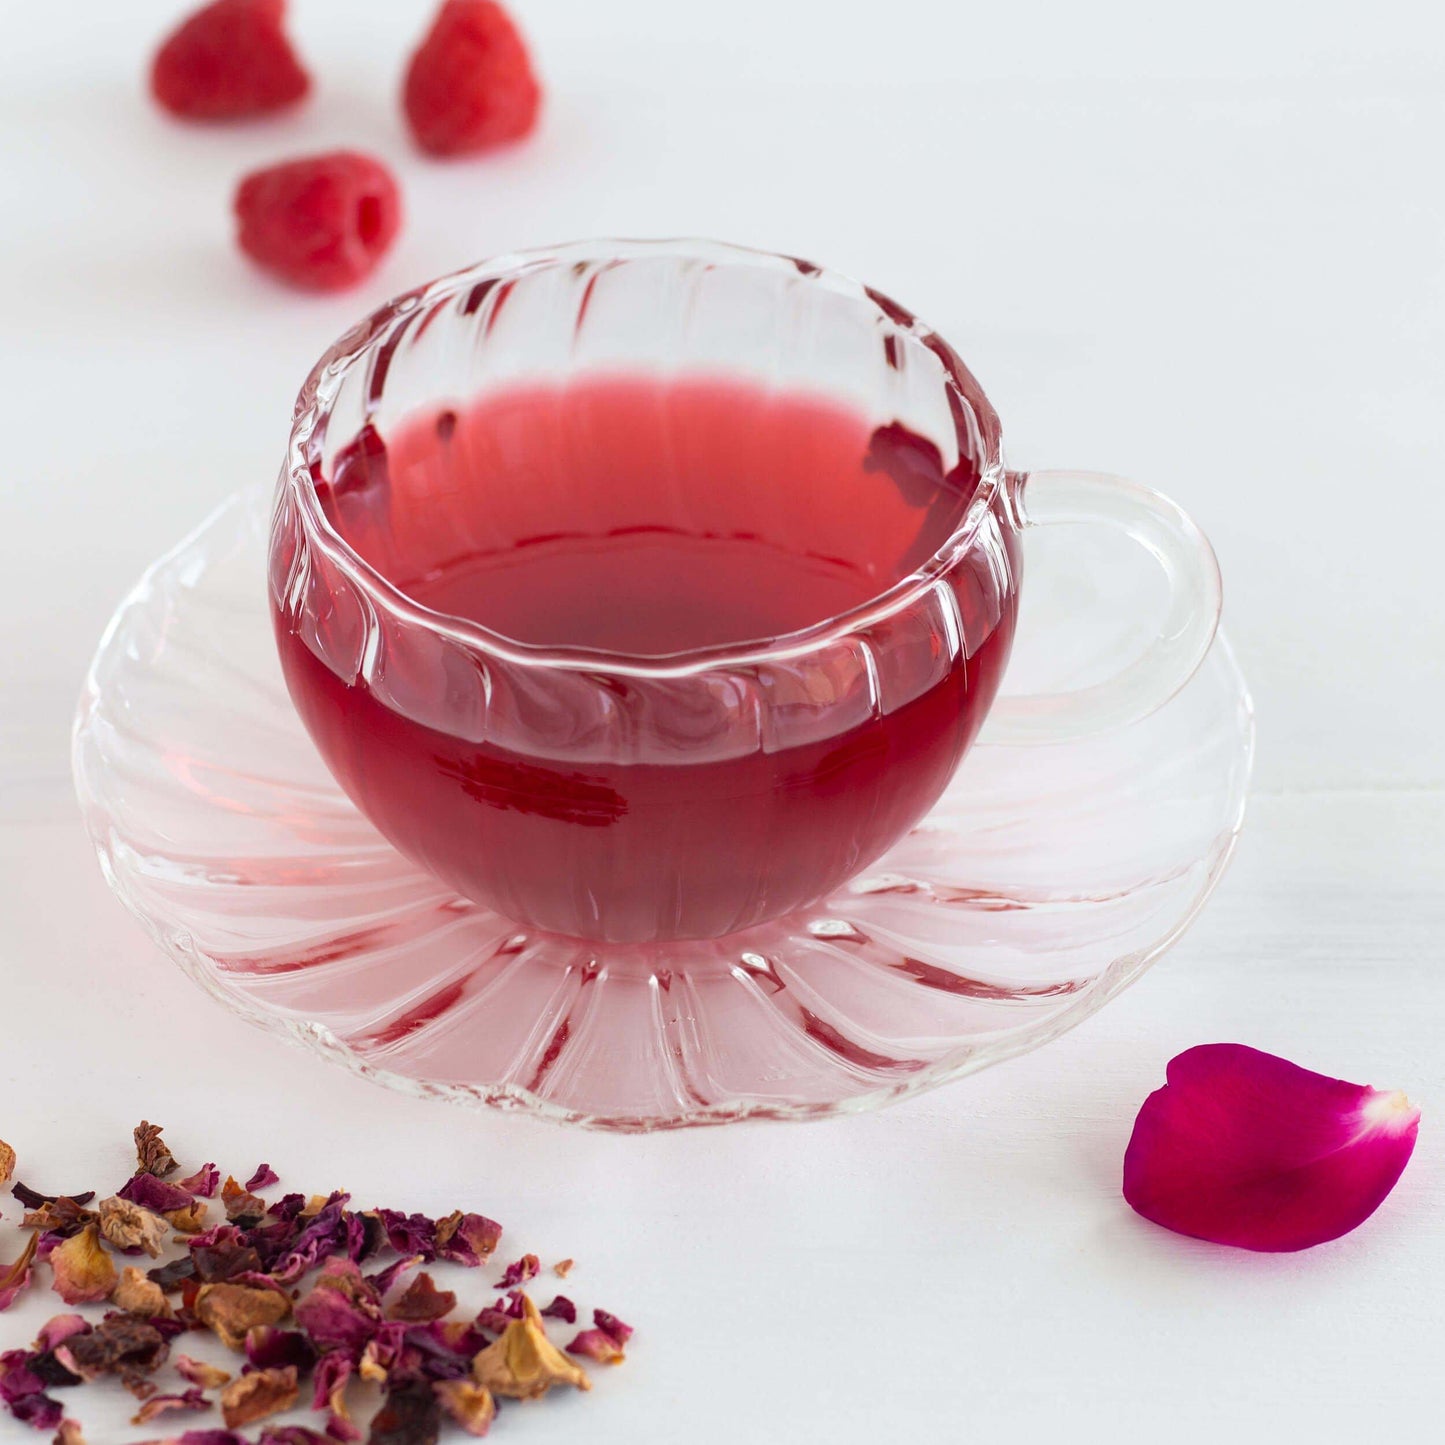 Rose Petal Raspberry Herbal Tea shown as brewed tea in a clear glass teacup and saucer, with loose tea leaves and a single red rose petal in the foreground, and three raspberries in the background